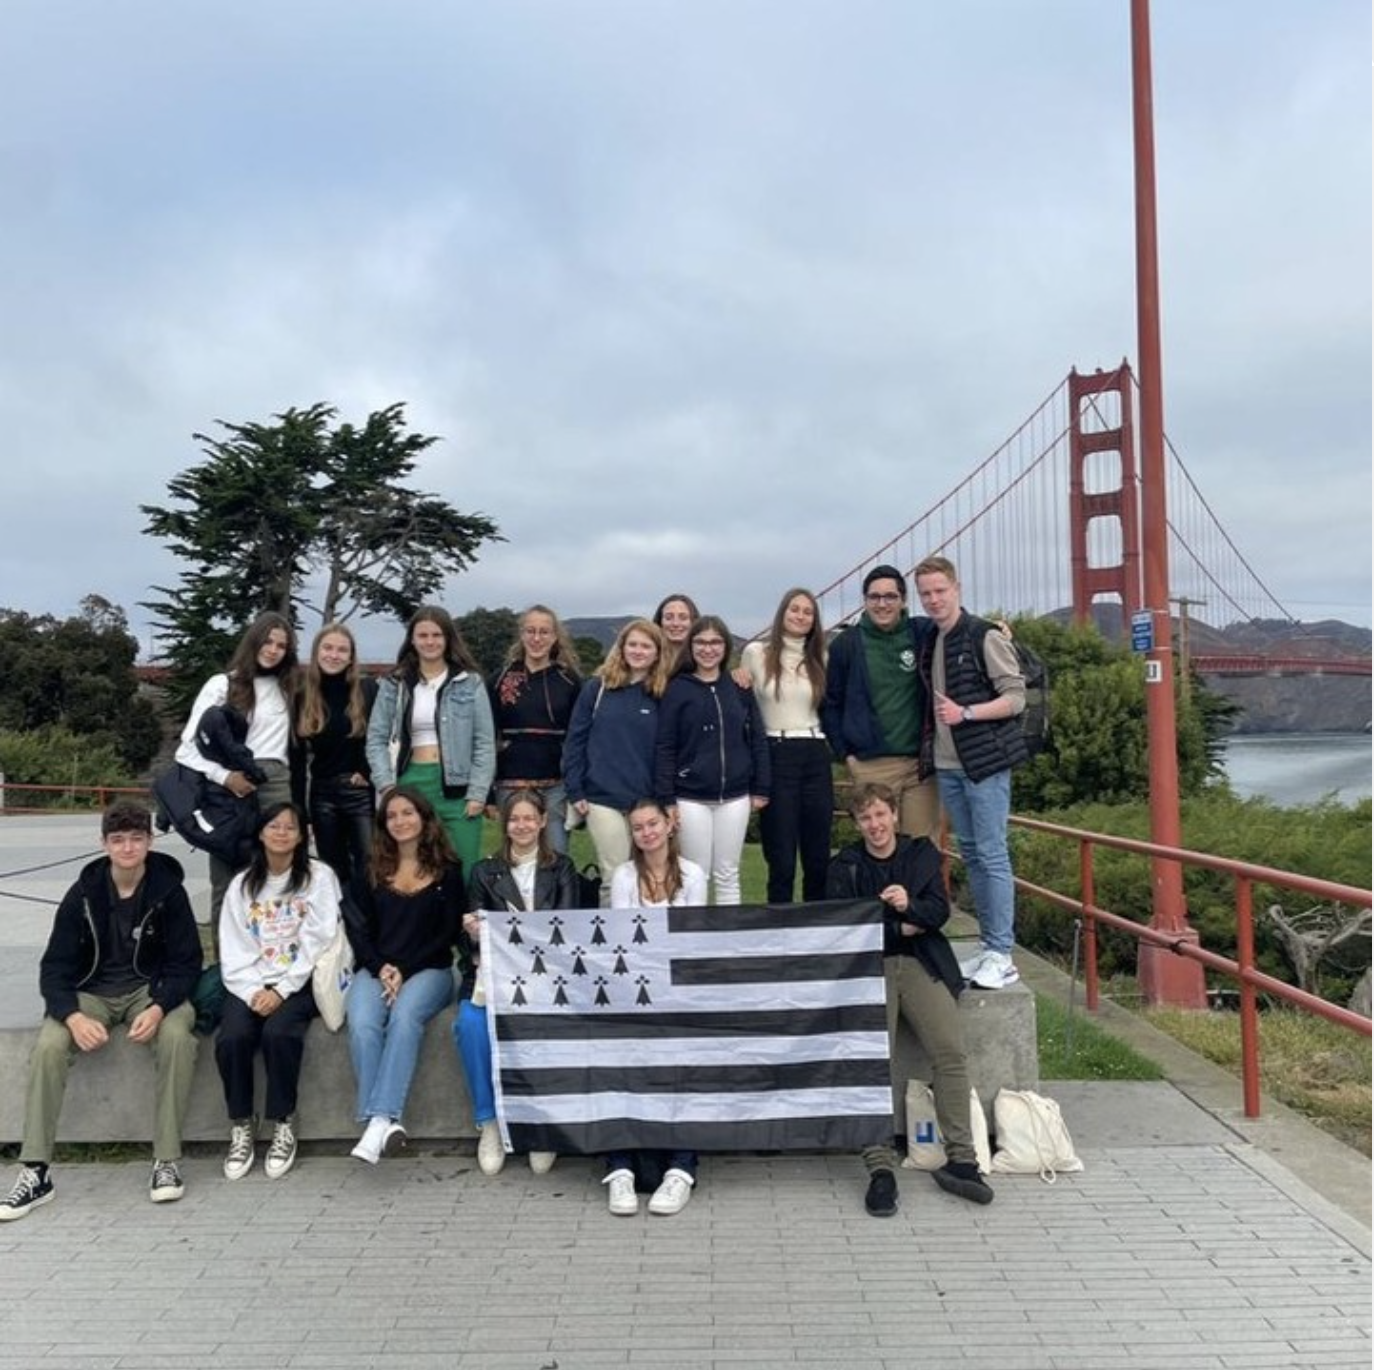 French exchange students from Lycée Saint Anne at the Golden Gate Bridge. Photo credit: Urban School.